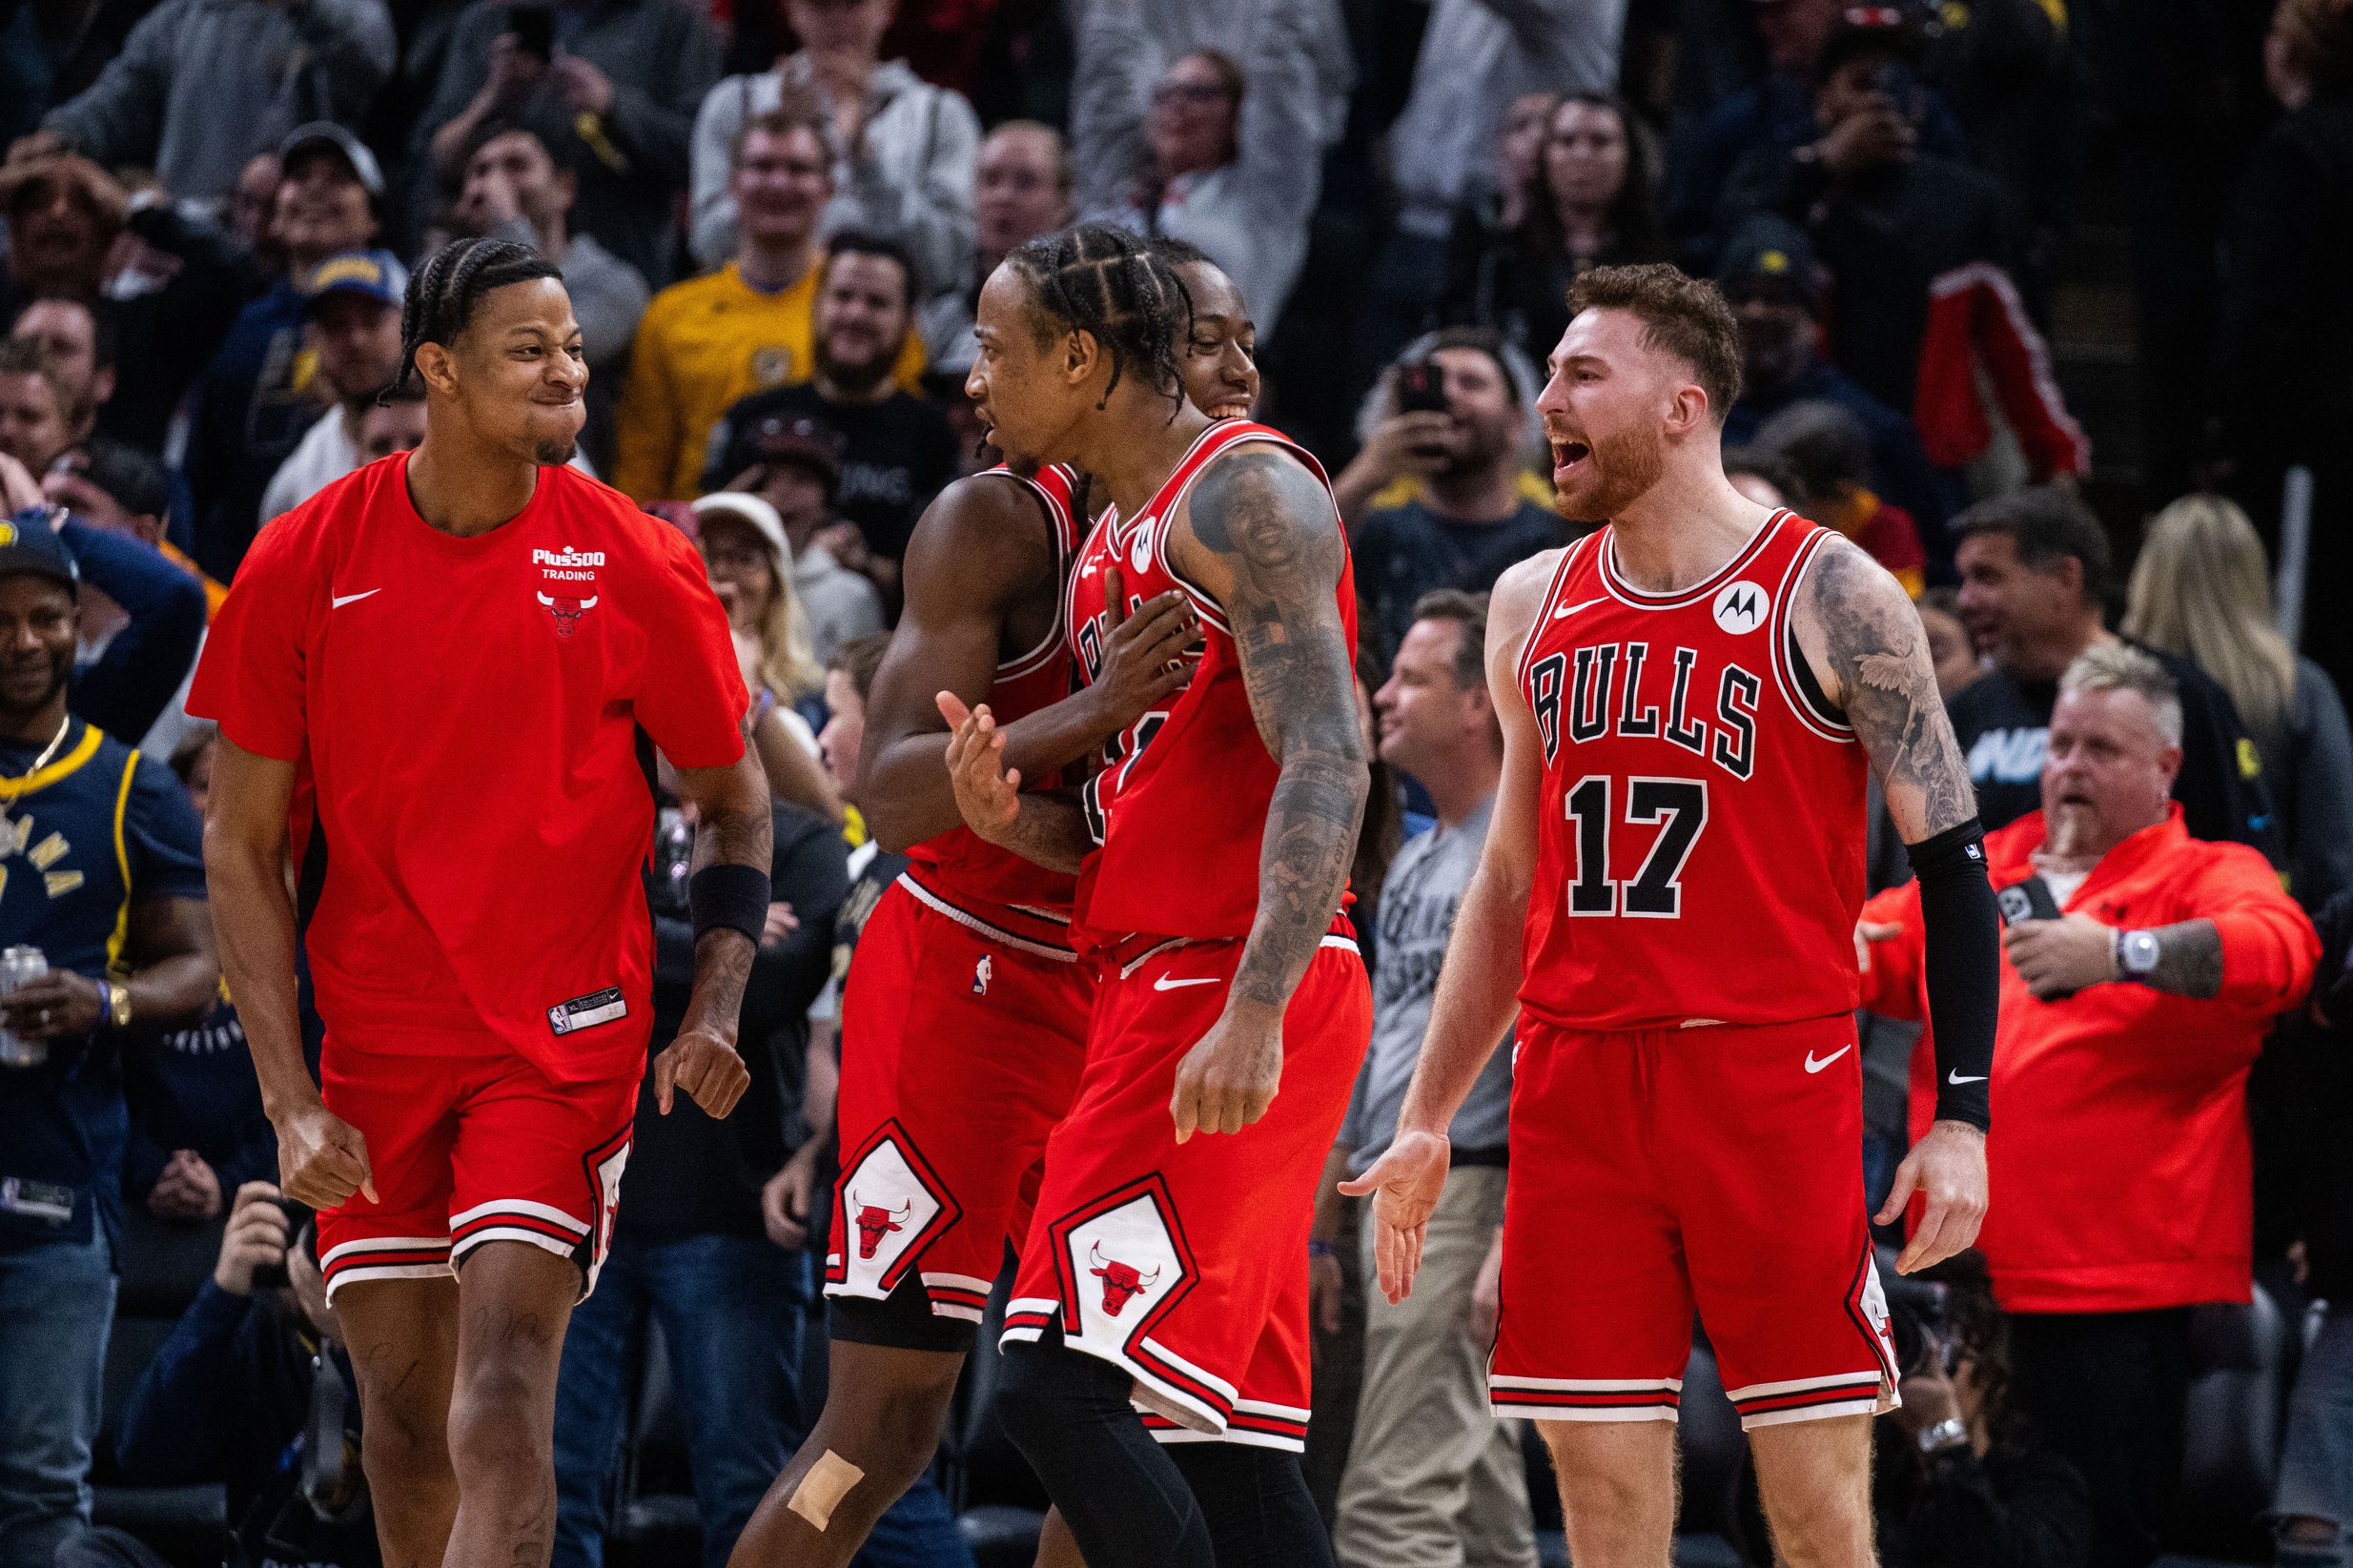 Chicago Bulls forward DeMar DeRozan (11) celebrates with his team his basket to tie the game and go to overtime against the Indiana Pacers at Gainbridge Fieldhouse.